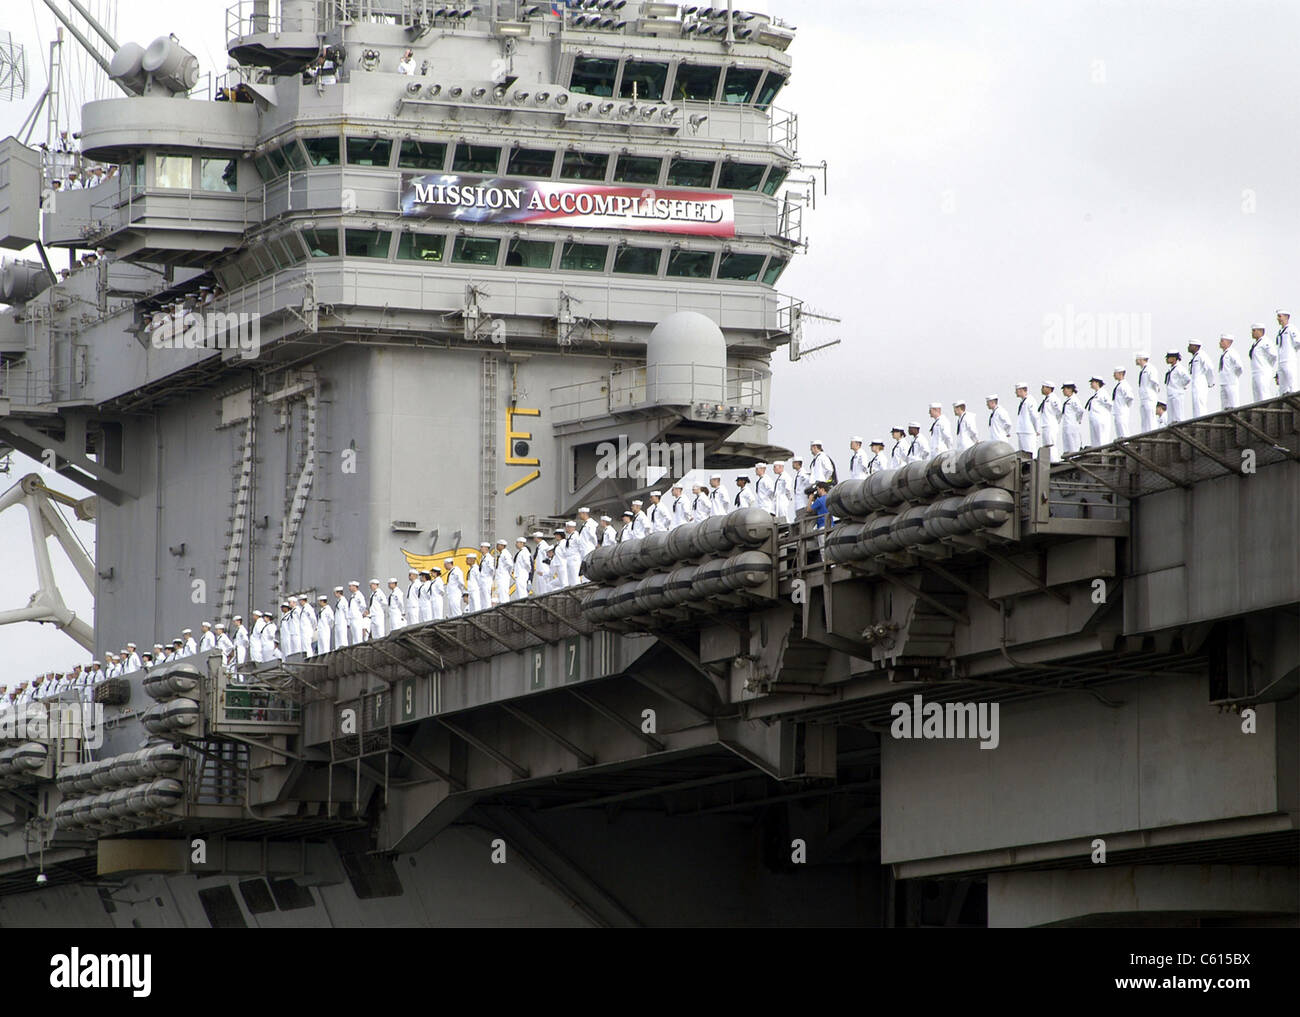 USS Abraham Lincoln arrives at San Diego returning from a 10-month deployment in Arabian Gulf. The 'Mission Accomplished' banner reflects early optimism that preceded seven years of insurgency following the 2003 invasion of Iraq. May 2 2003. (BSLOC 2011 12 136) Stock Photo